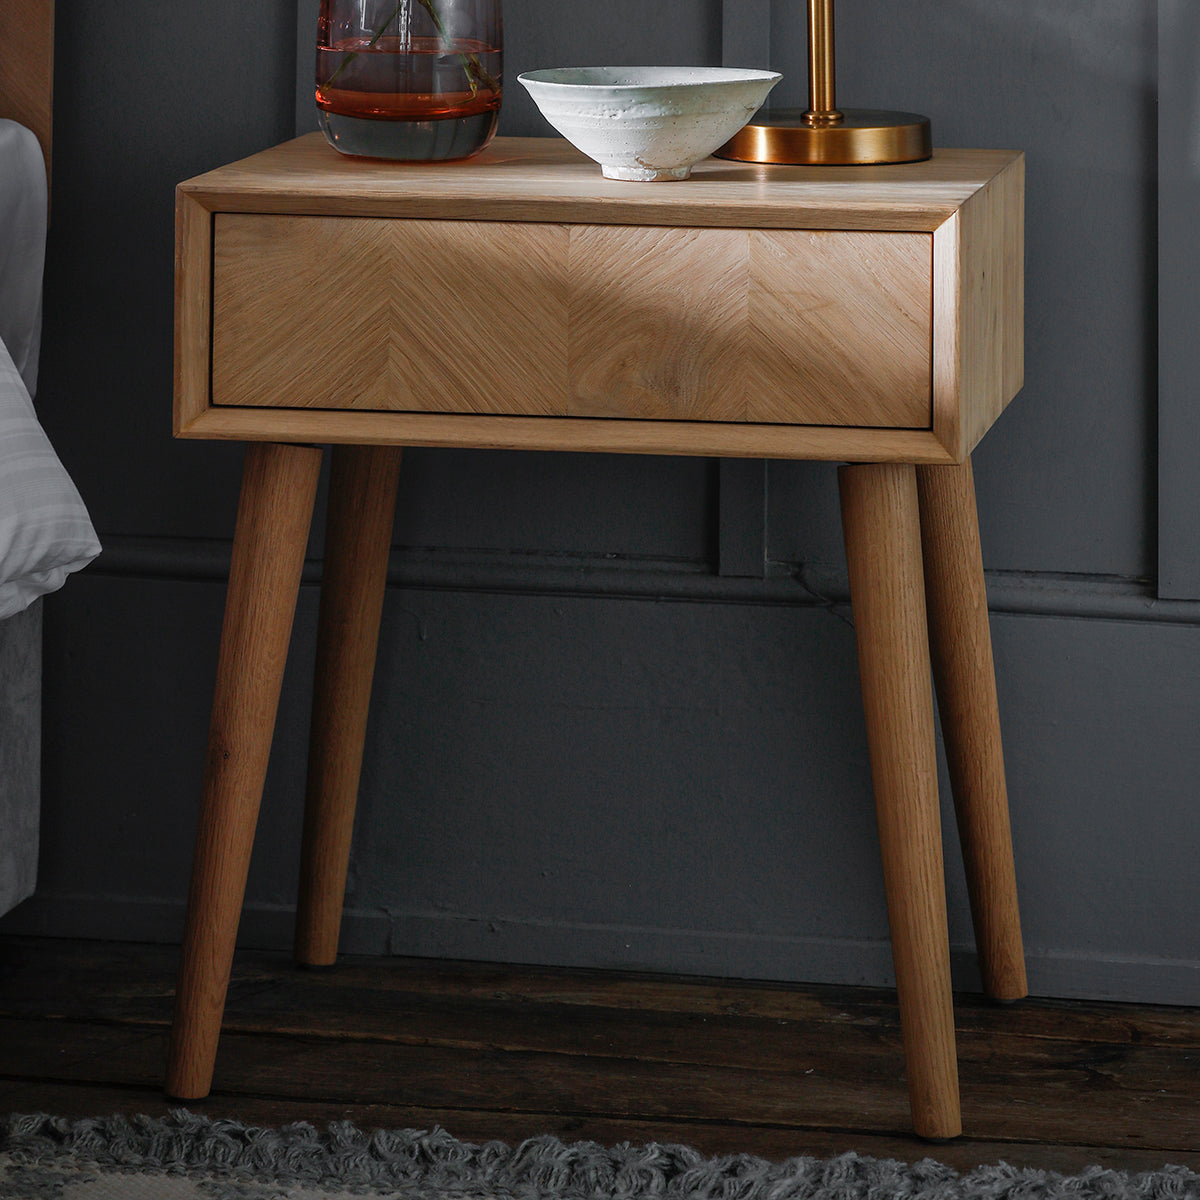 A Tristford 1 Drawer Side Table by Kikiathome.co.uk for interior decor purposes with a lamp.